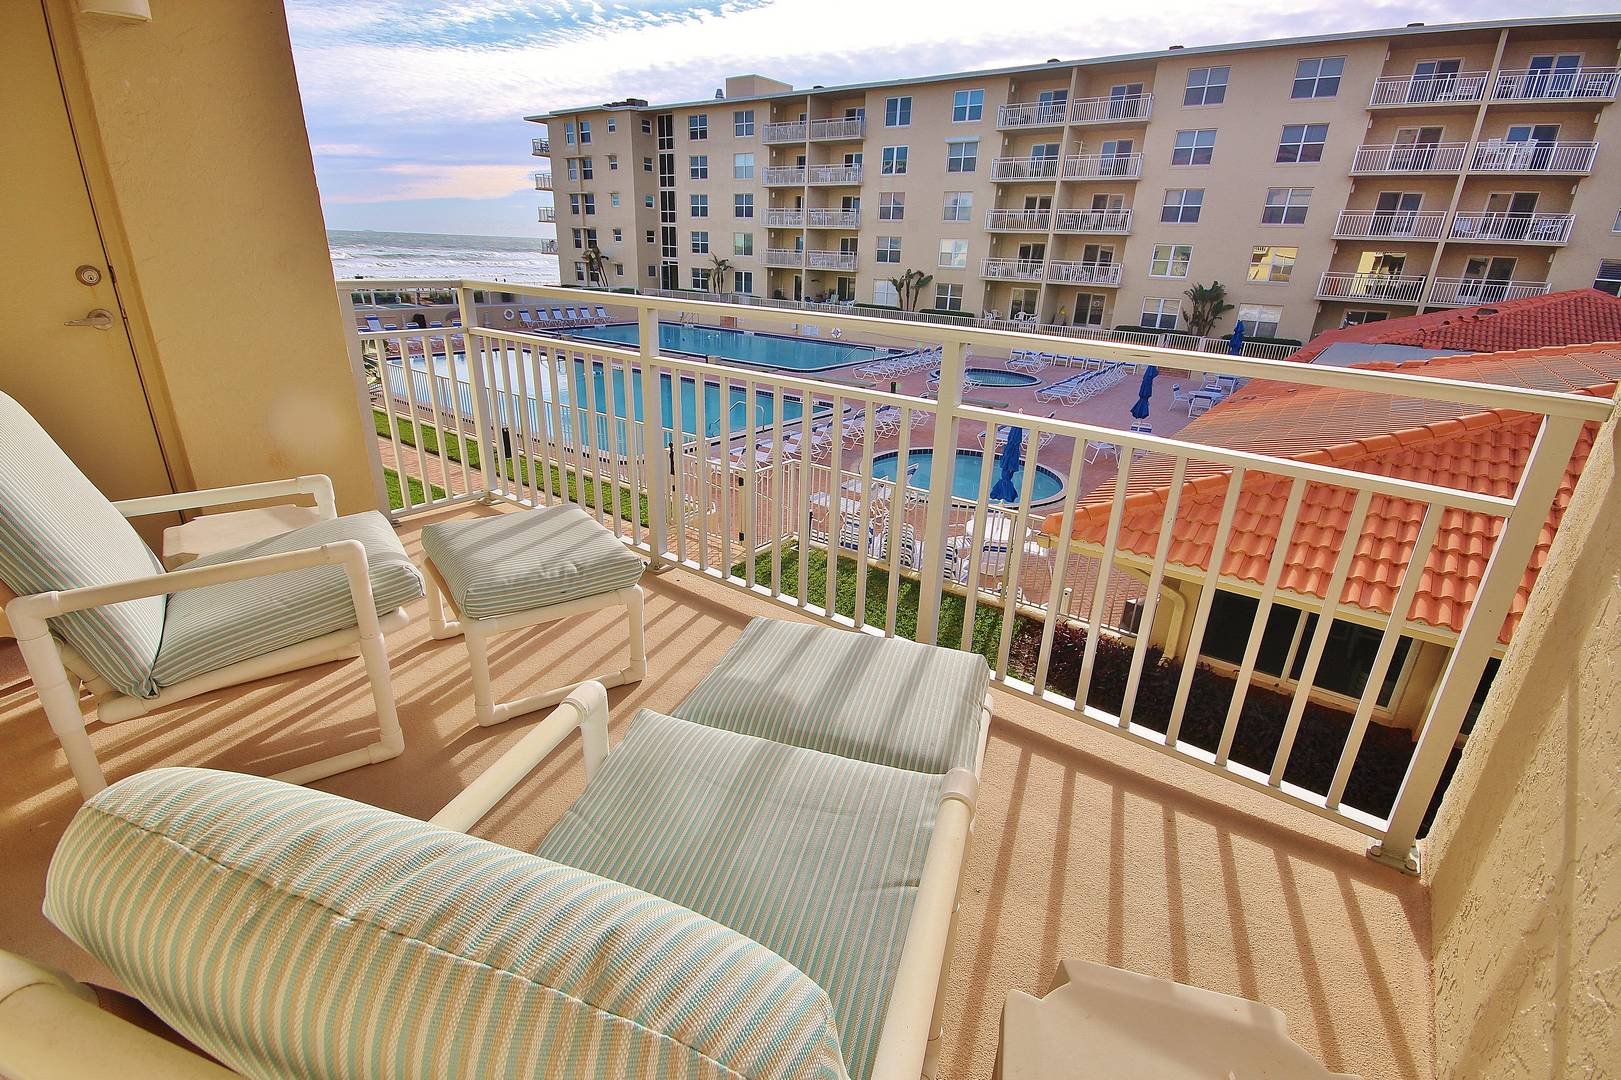 Feel the great weather on this balcony with an ocean view